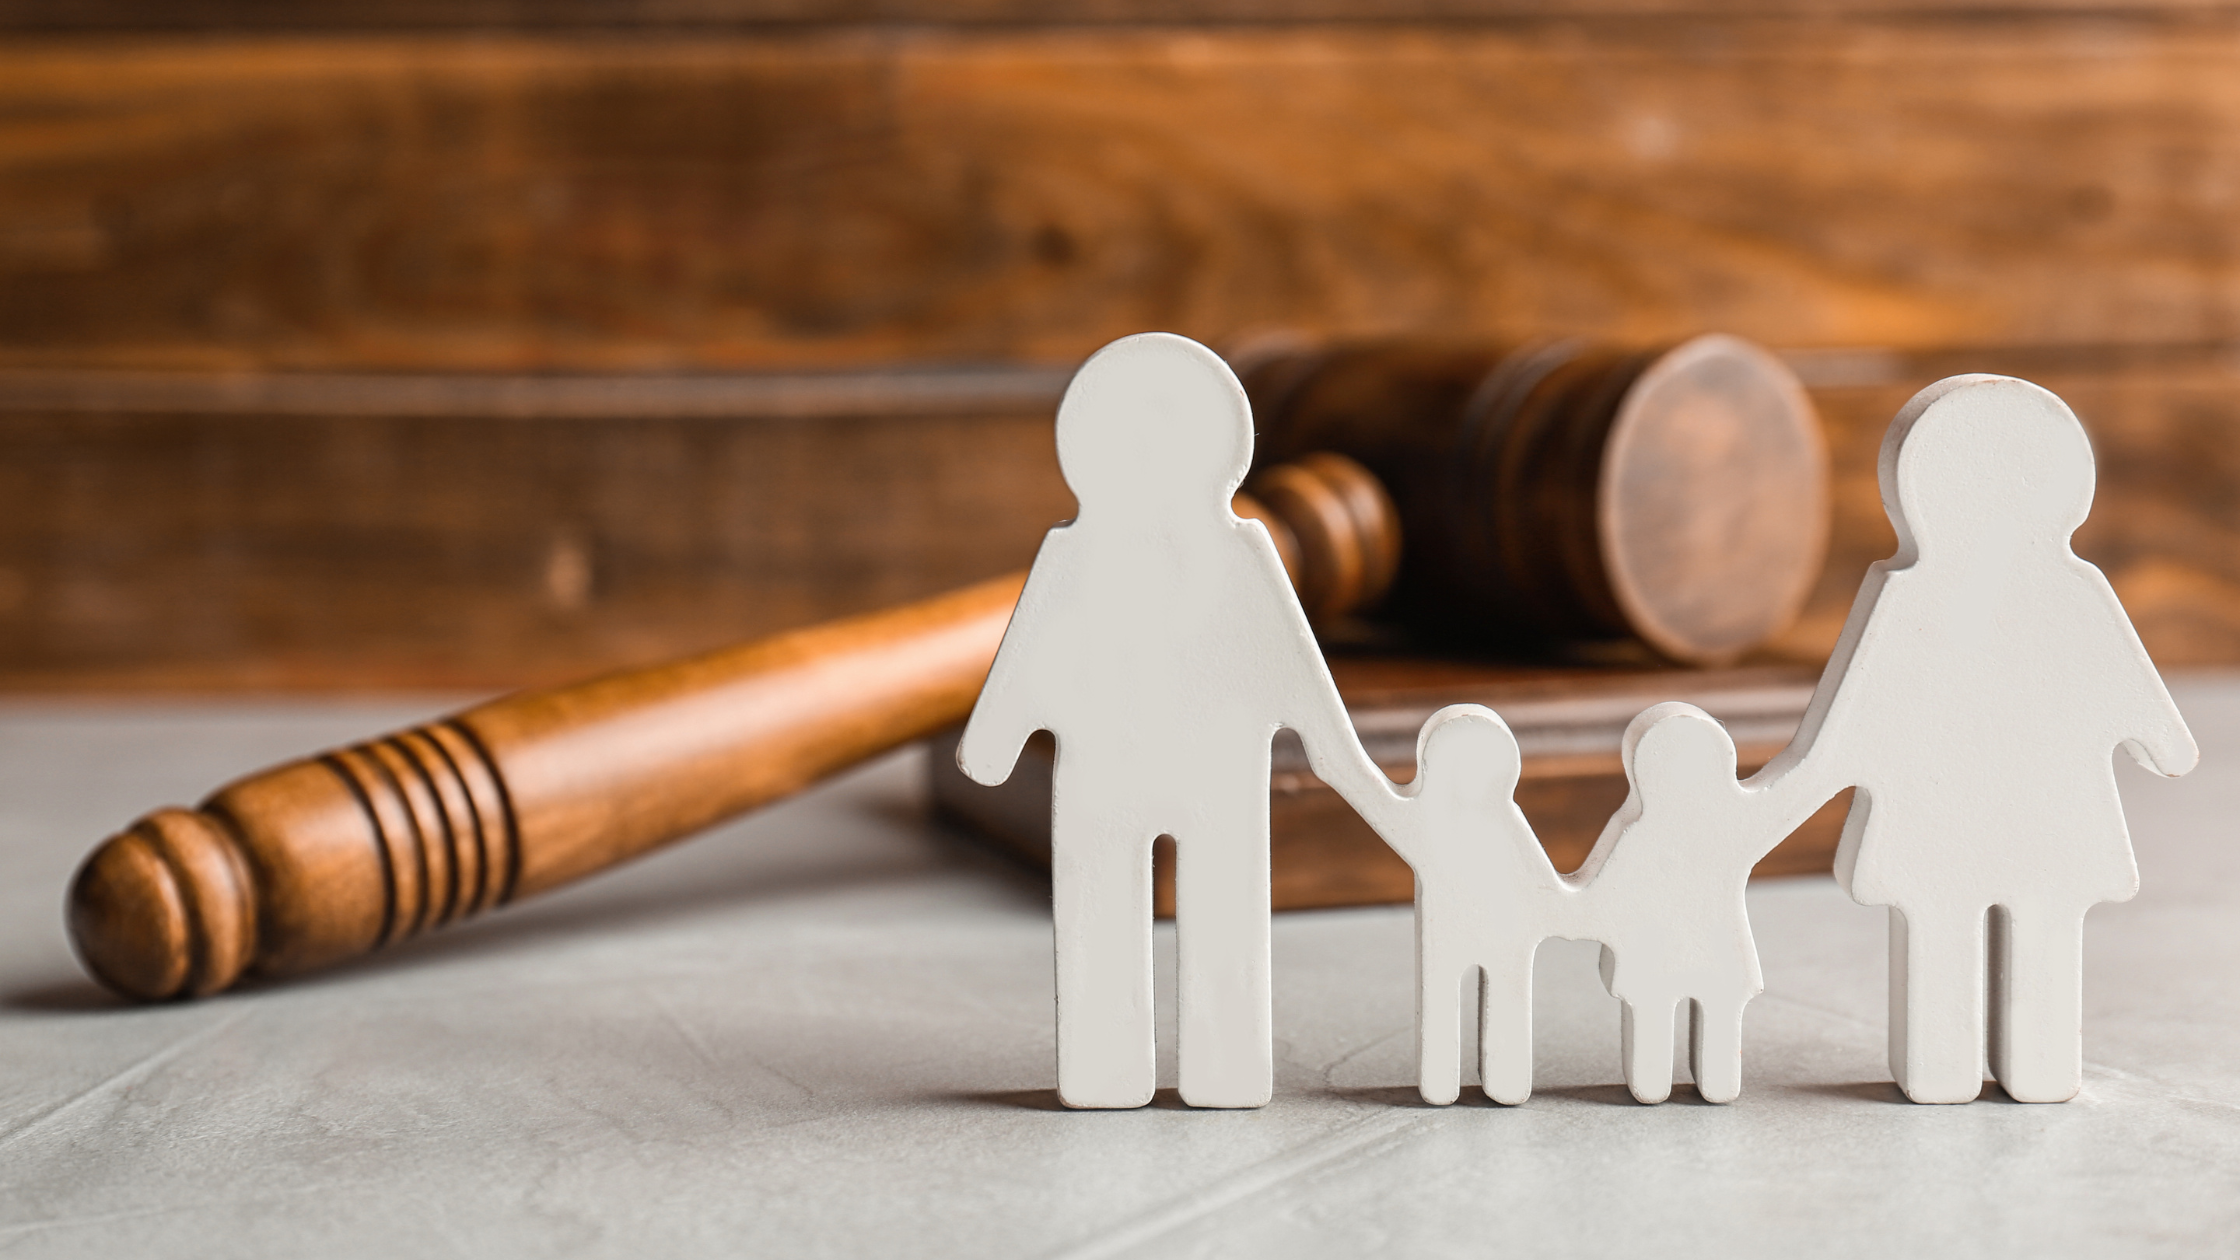 Conservatorship vs. Guardianship: What's the Difference?